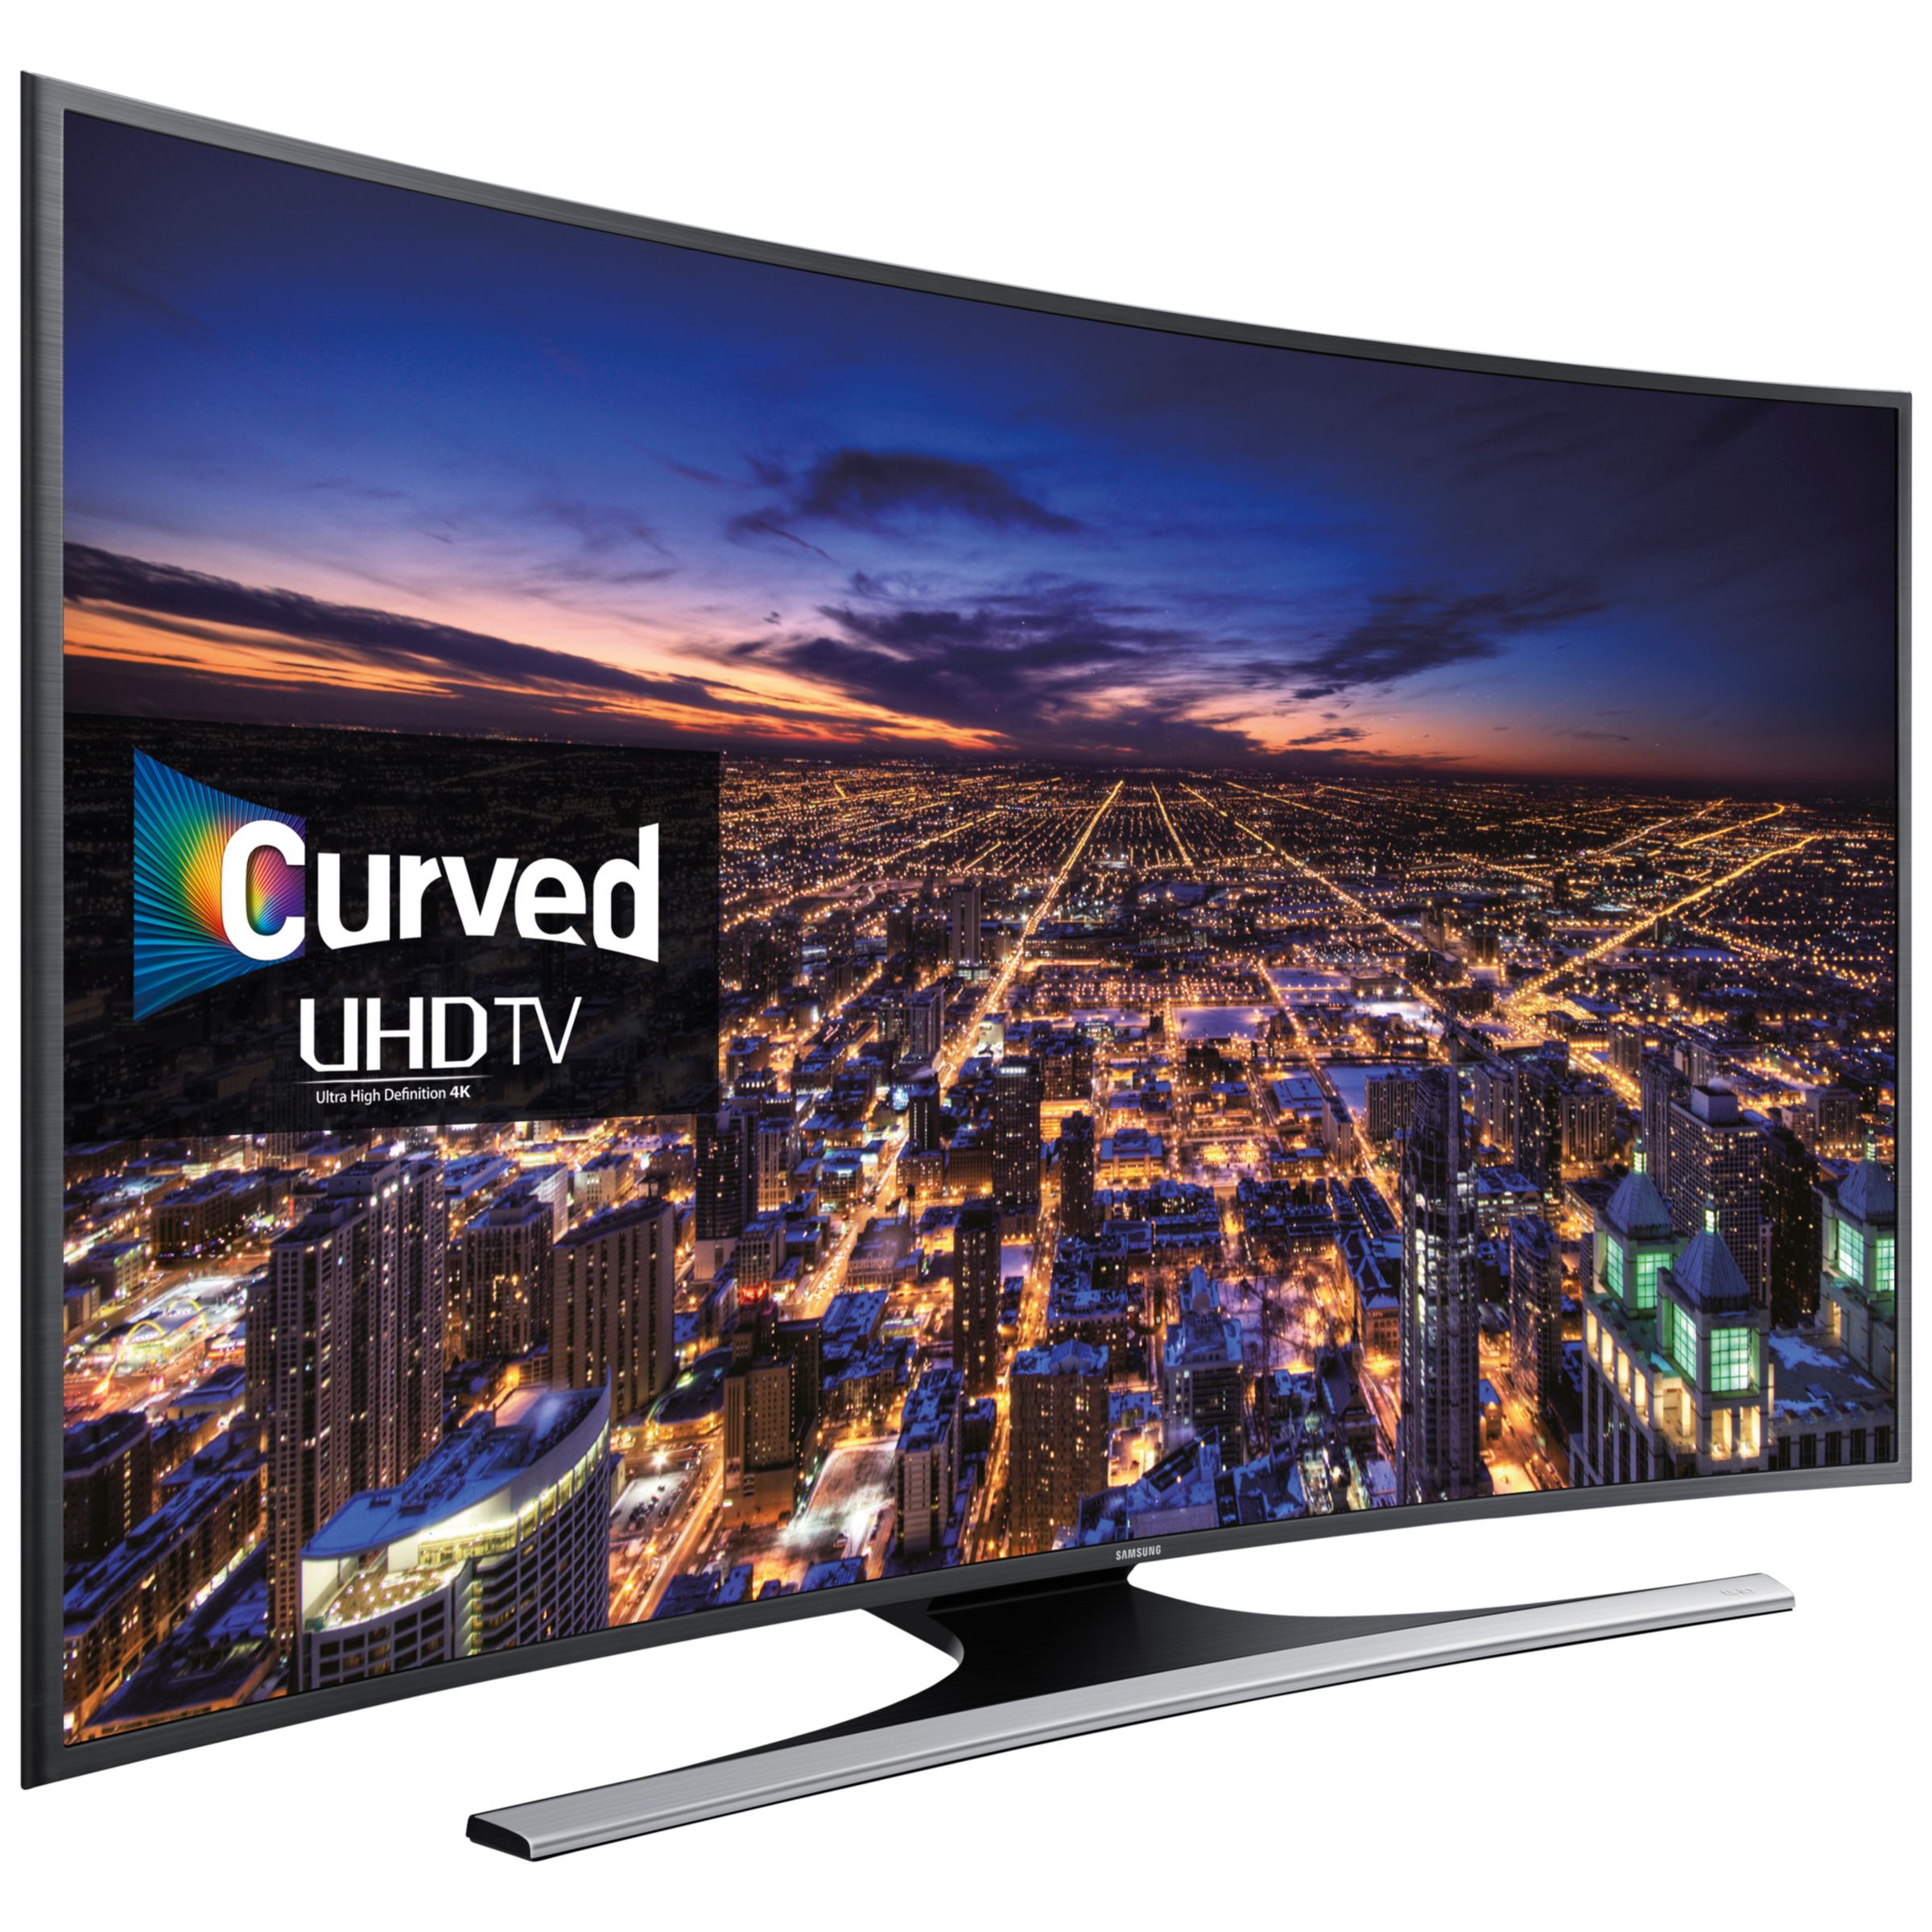 Samsung UE48JU6500 Curved HDR 4K Ultra HD Smart TV, 48" with HD, Built-In Wi-Fi and Intelligent Navigation